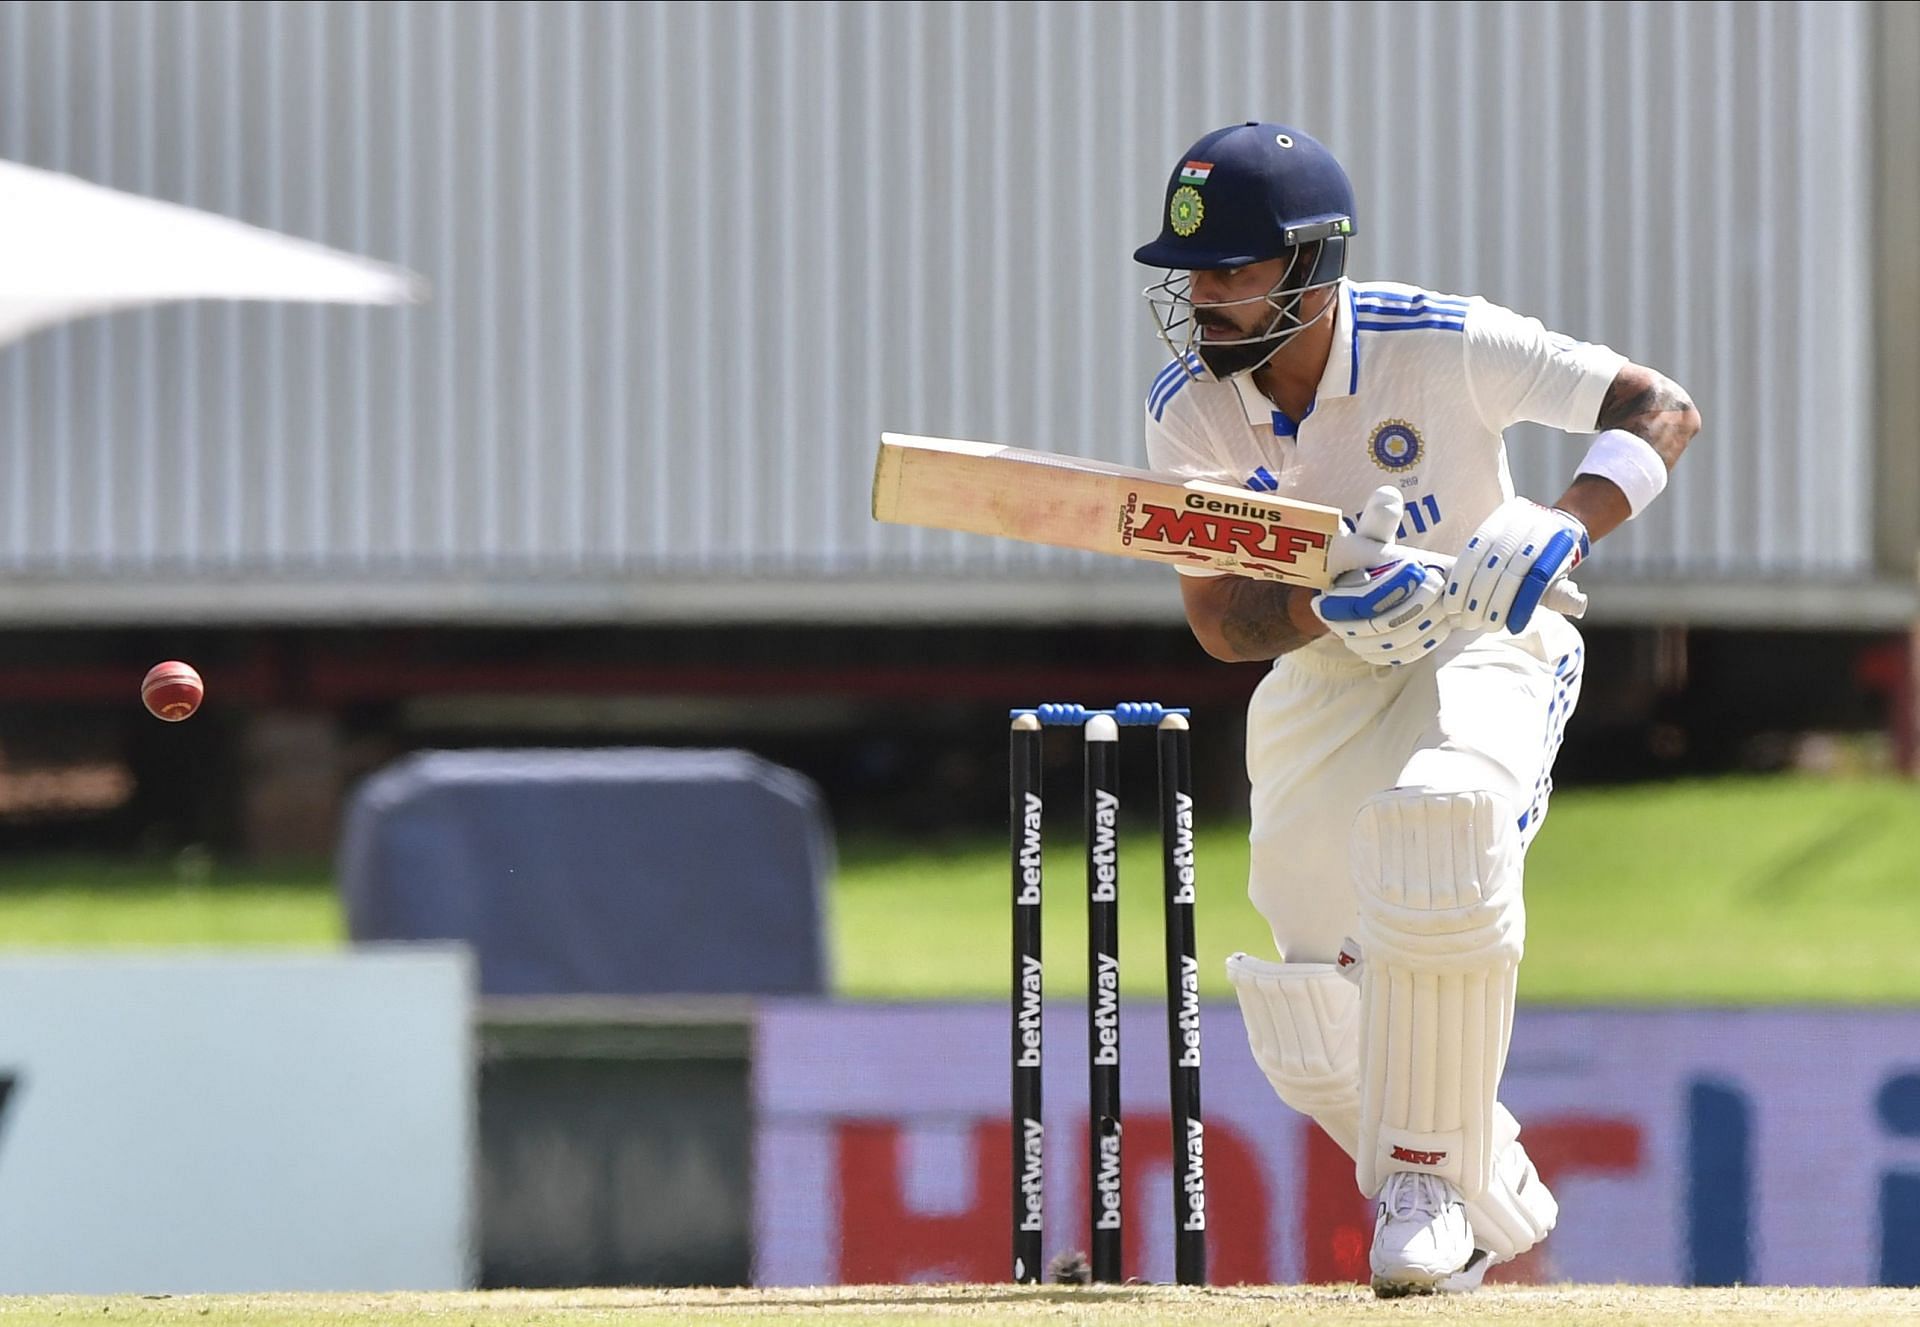 Virat Kohli looked assured at the crease in the first Test